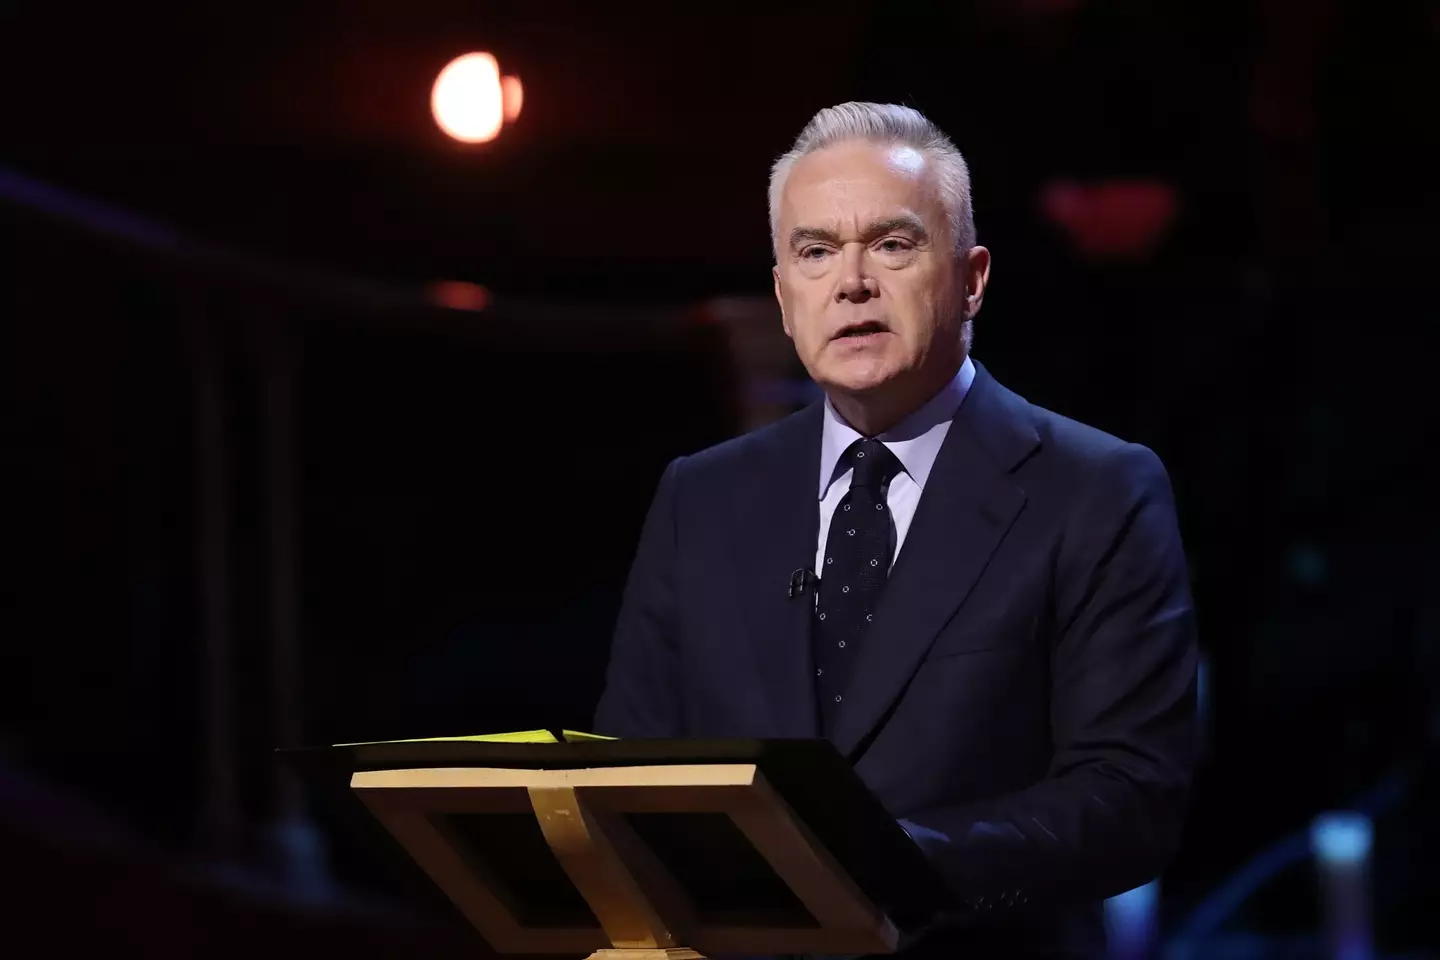 Huw Edwards has been named as the BBC presenter accused of paying a teenager for sexually explicit images.